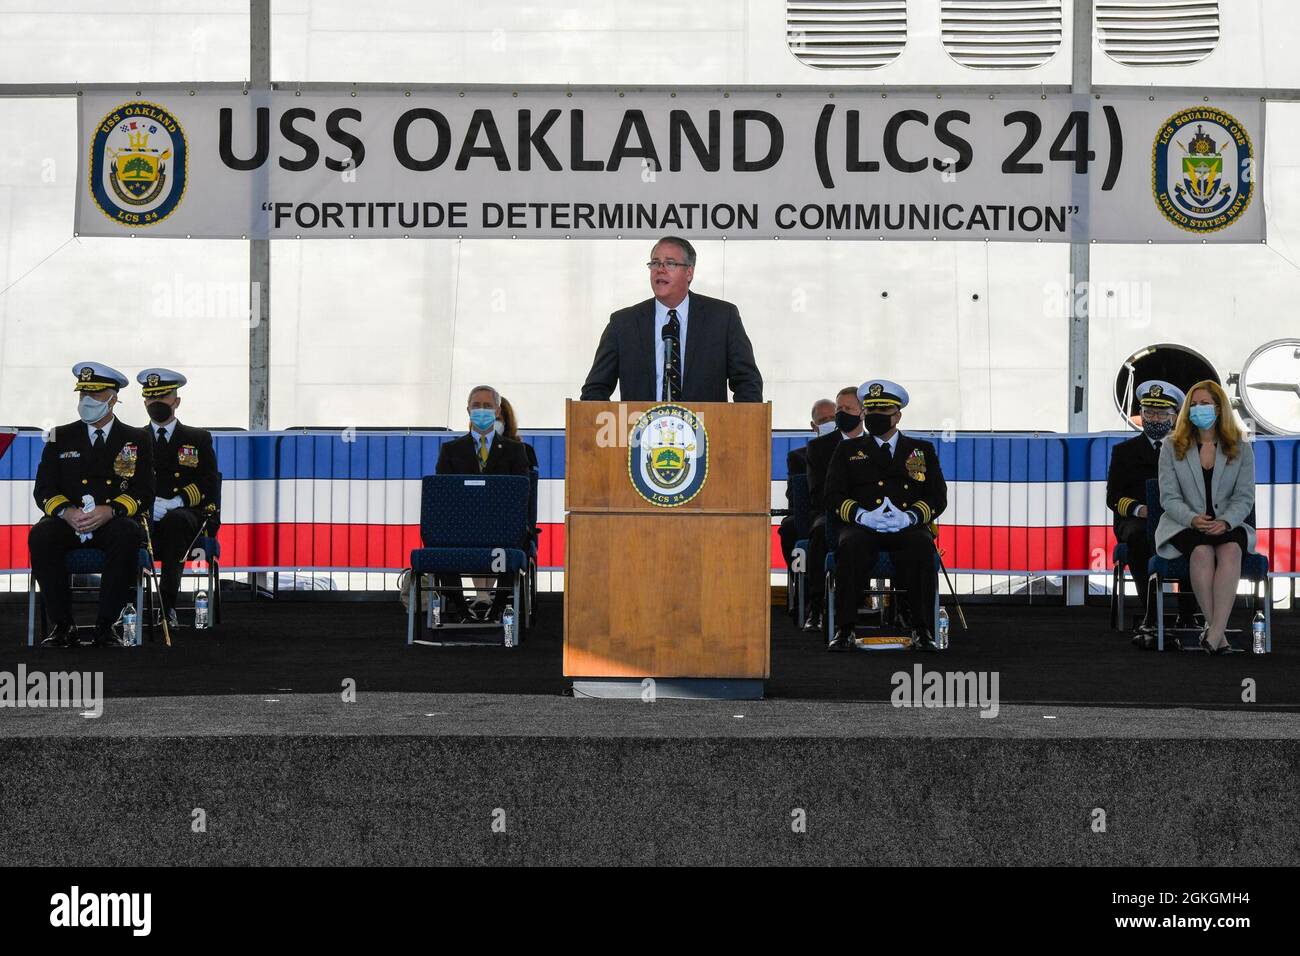 210417-N-YS140-105  Oakland, Calif. (April 17, 2021) Acting Secretary of the Navy Thomas W. Harker provides the principal address during the commissioning ceremony of USS Oakland (LCS 24). The LCS is a fast, agile, mission-focused platform designed to operate in near-shore environments, while capable of open ocean tasking. The LCS can support forward presence, maritime security, sea control, and deterrence. Oakland will be homeported San Diego. Stock Photo